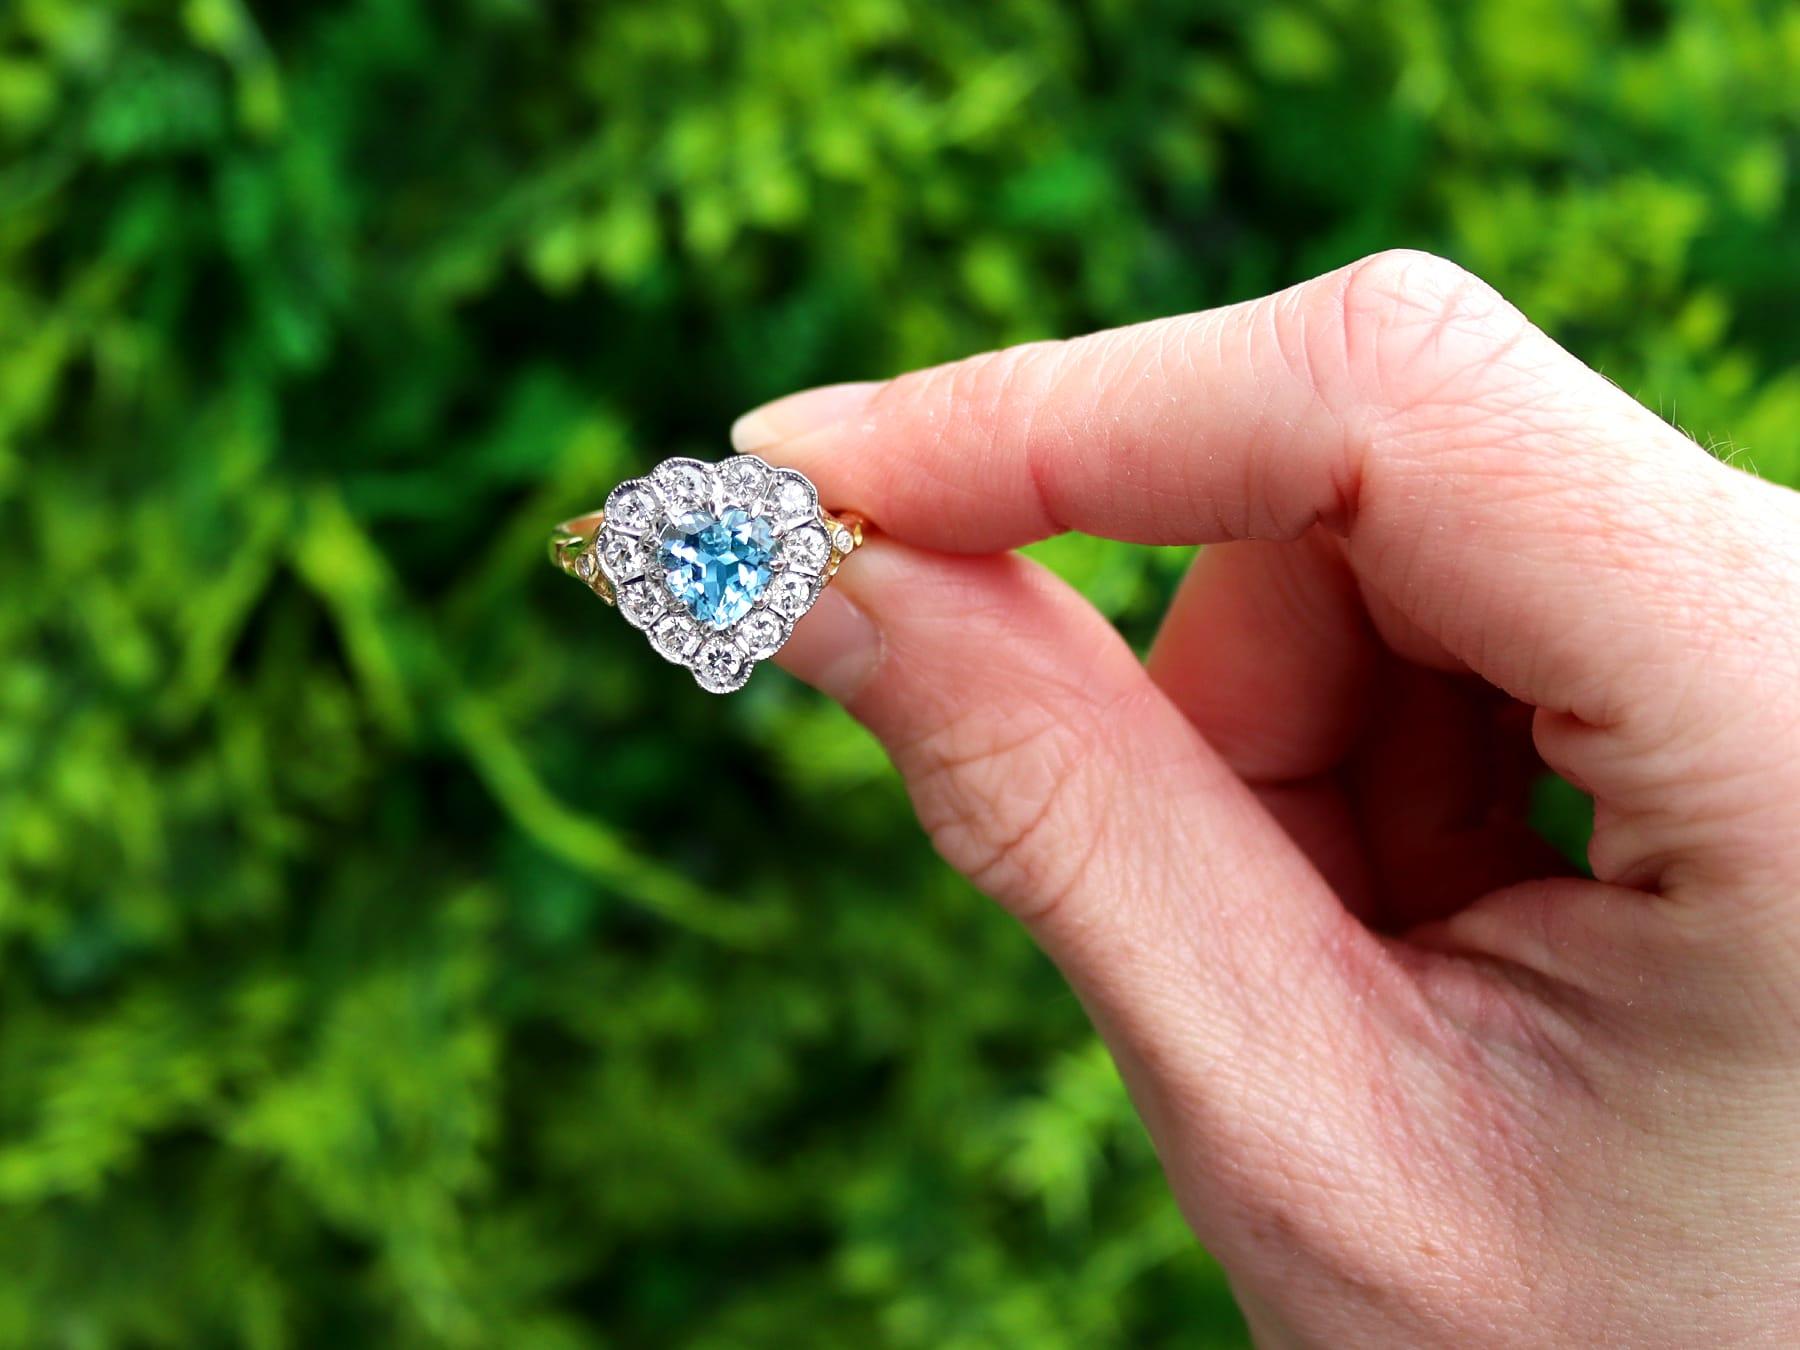 A fine and impressive 1.50 carat aquamarine and 0.88 carat diamond, 18 karat yellow gold and 18 karat white gold set dress ring; part of our diverse vintage jewellery and estate jewelry collections.

This fine and impressive vintage aquamarine ring